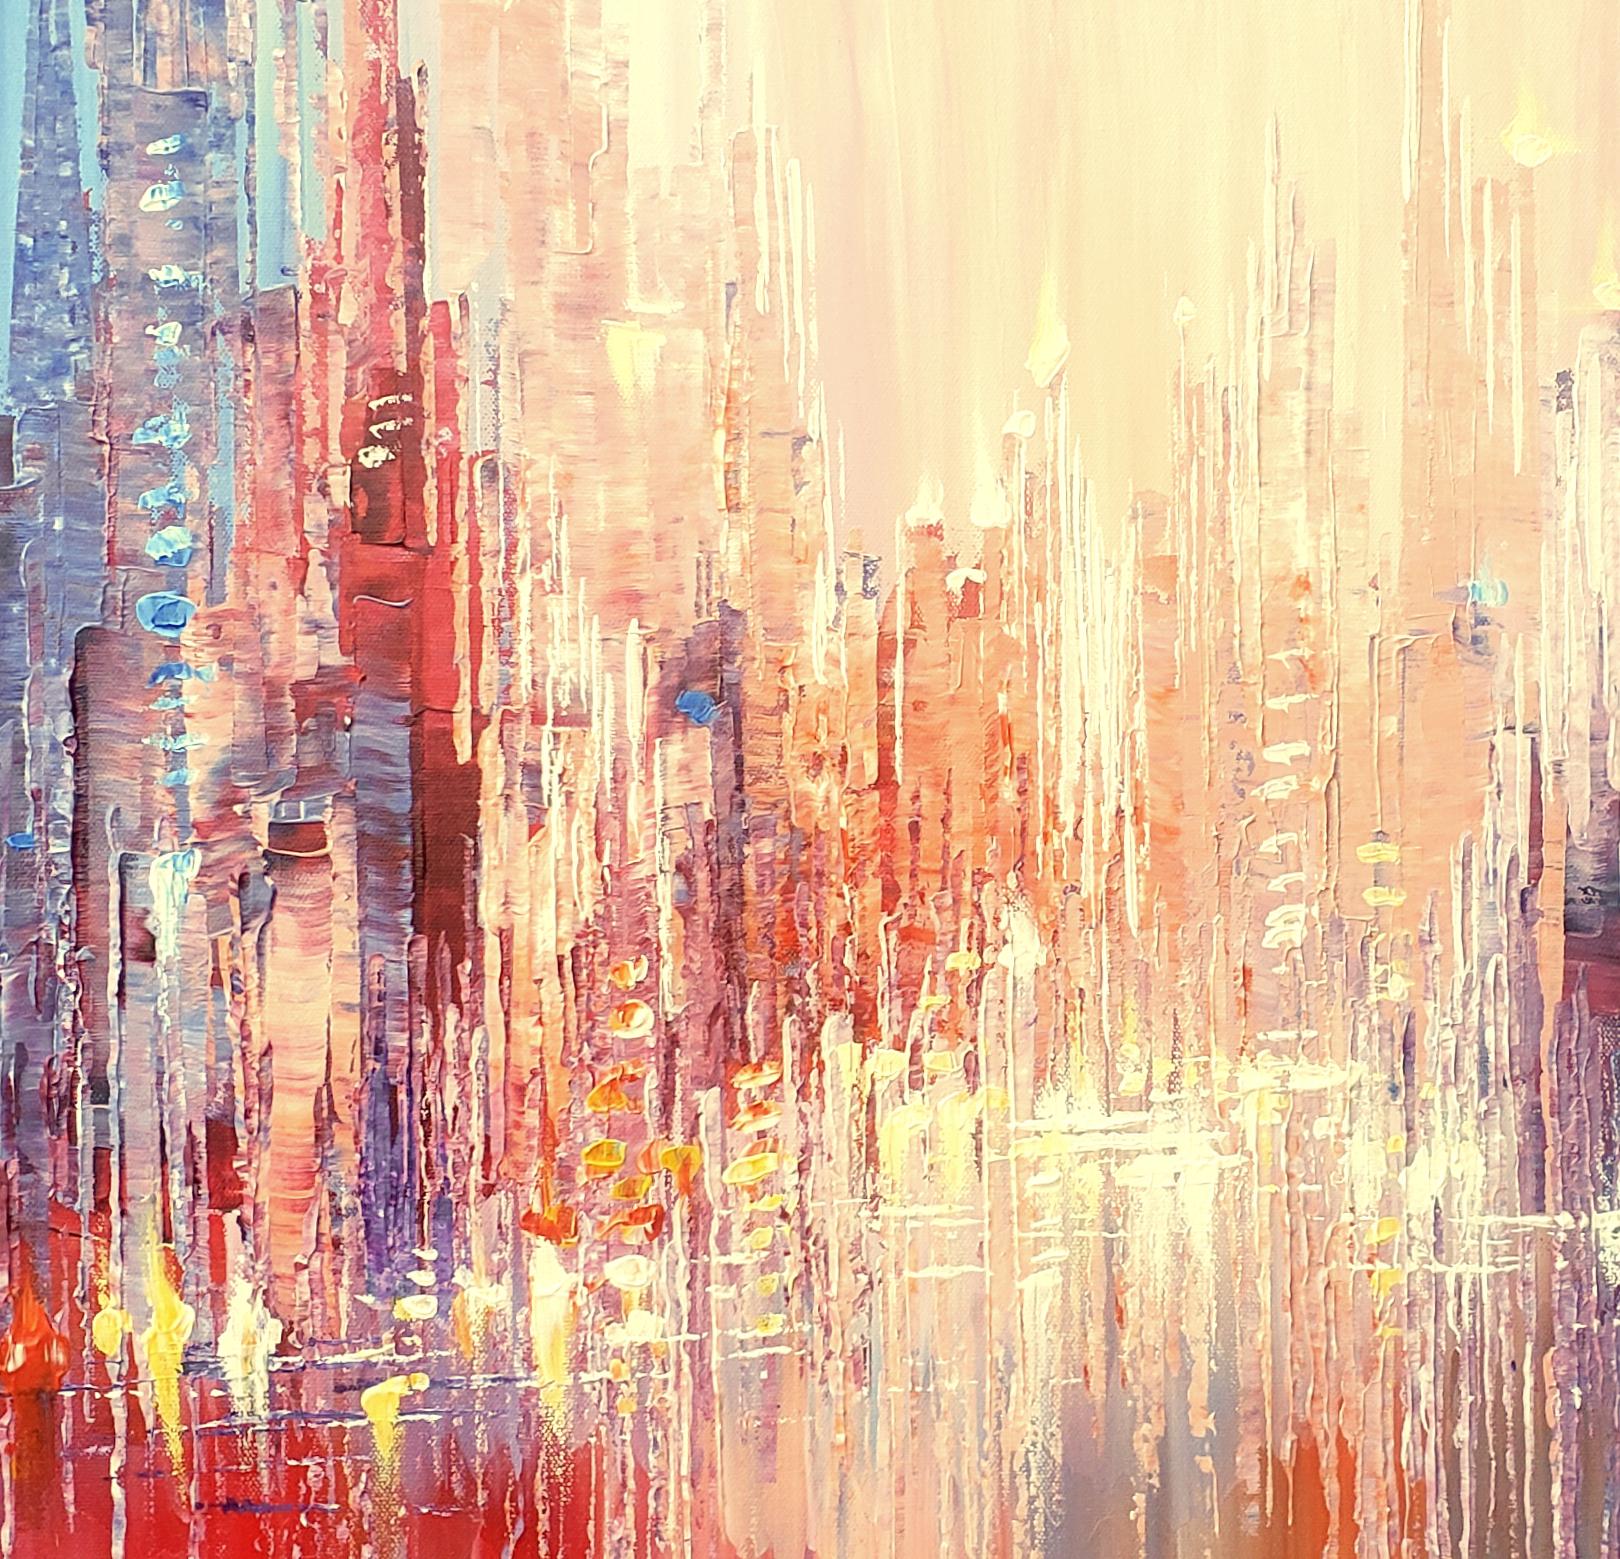 <p>Artist Comments<br>Artist Tatiana Iliina envisions a dazzling cityscape in lively vertical lines. She displays the structures in energetic strokes that convey the buzzing city. The tall buildings tower above the lustrous skyline in beams of red,